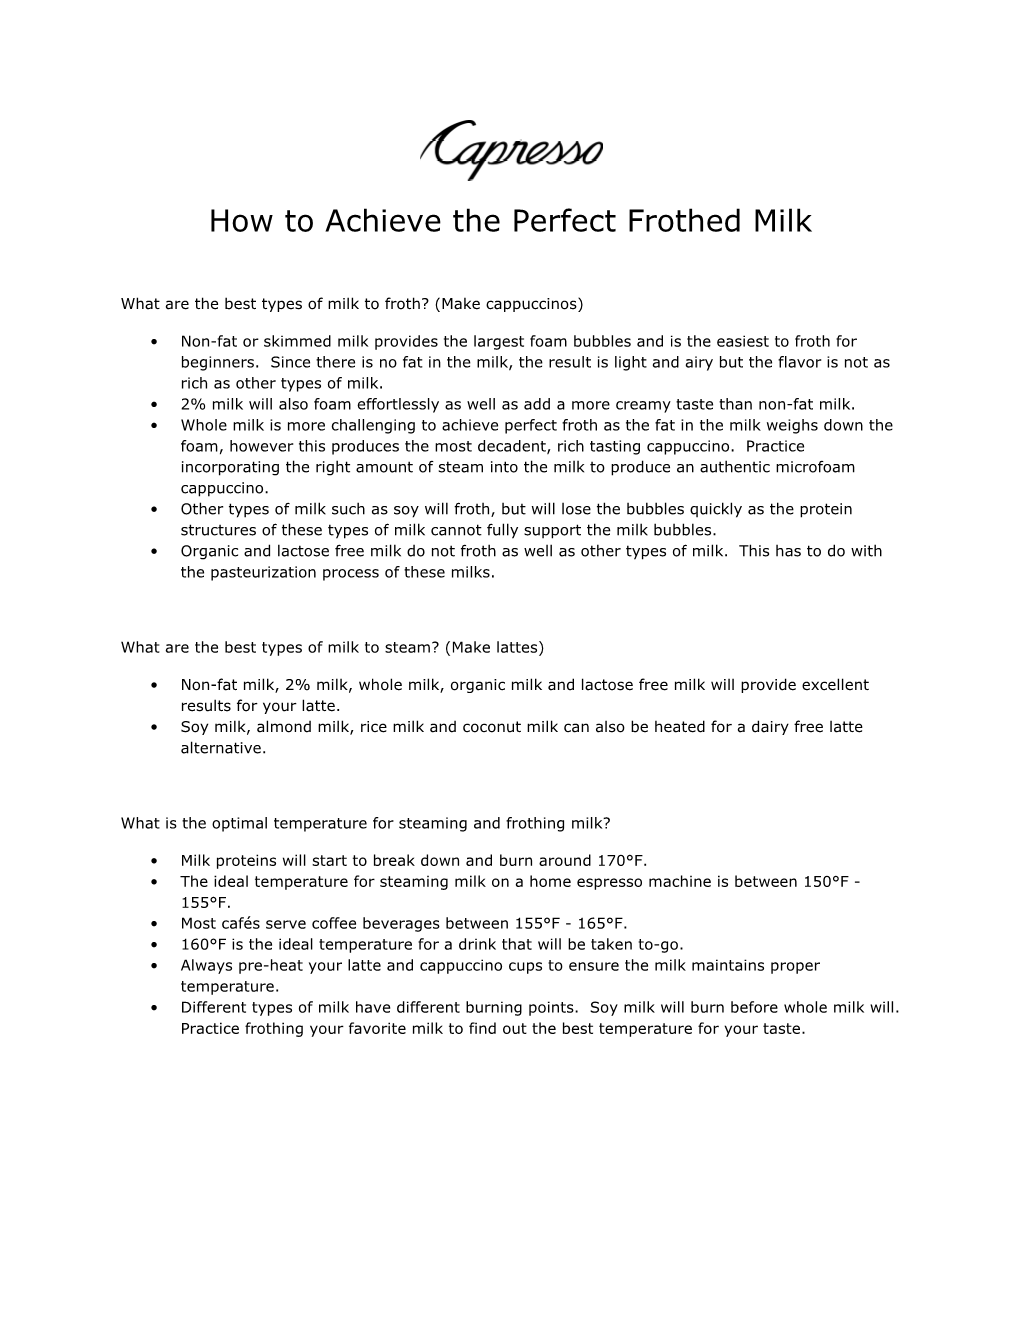 How to Achieve the Perfect Frothed Milk